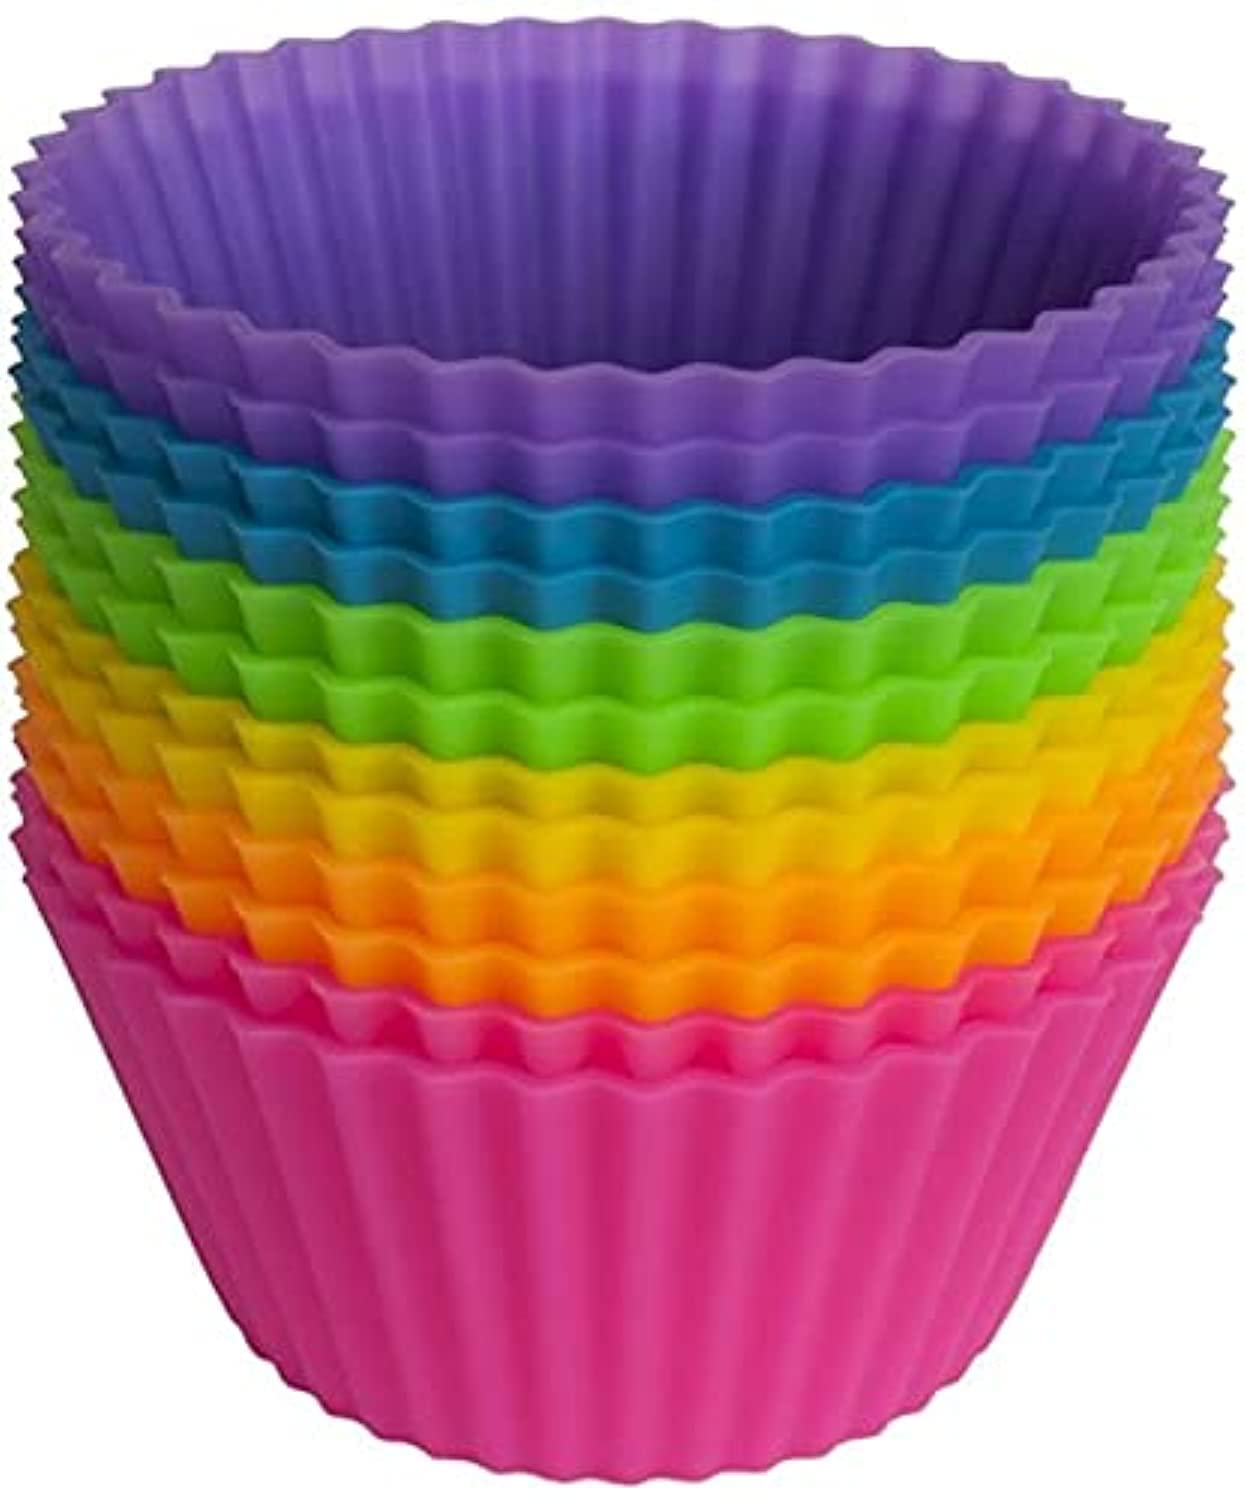 1 set Pantry Elements Silicone Cupcake Liners/Baking Cups - 12 Vibrant Muffin Molds5213_ with one years guarantee of satisfaction and quality